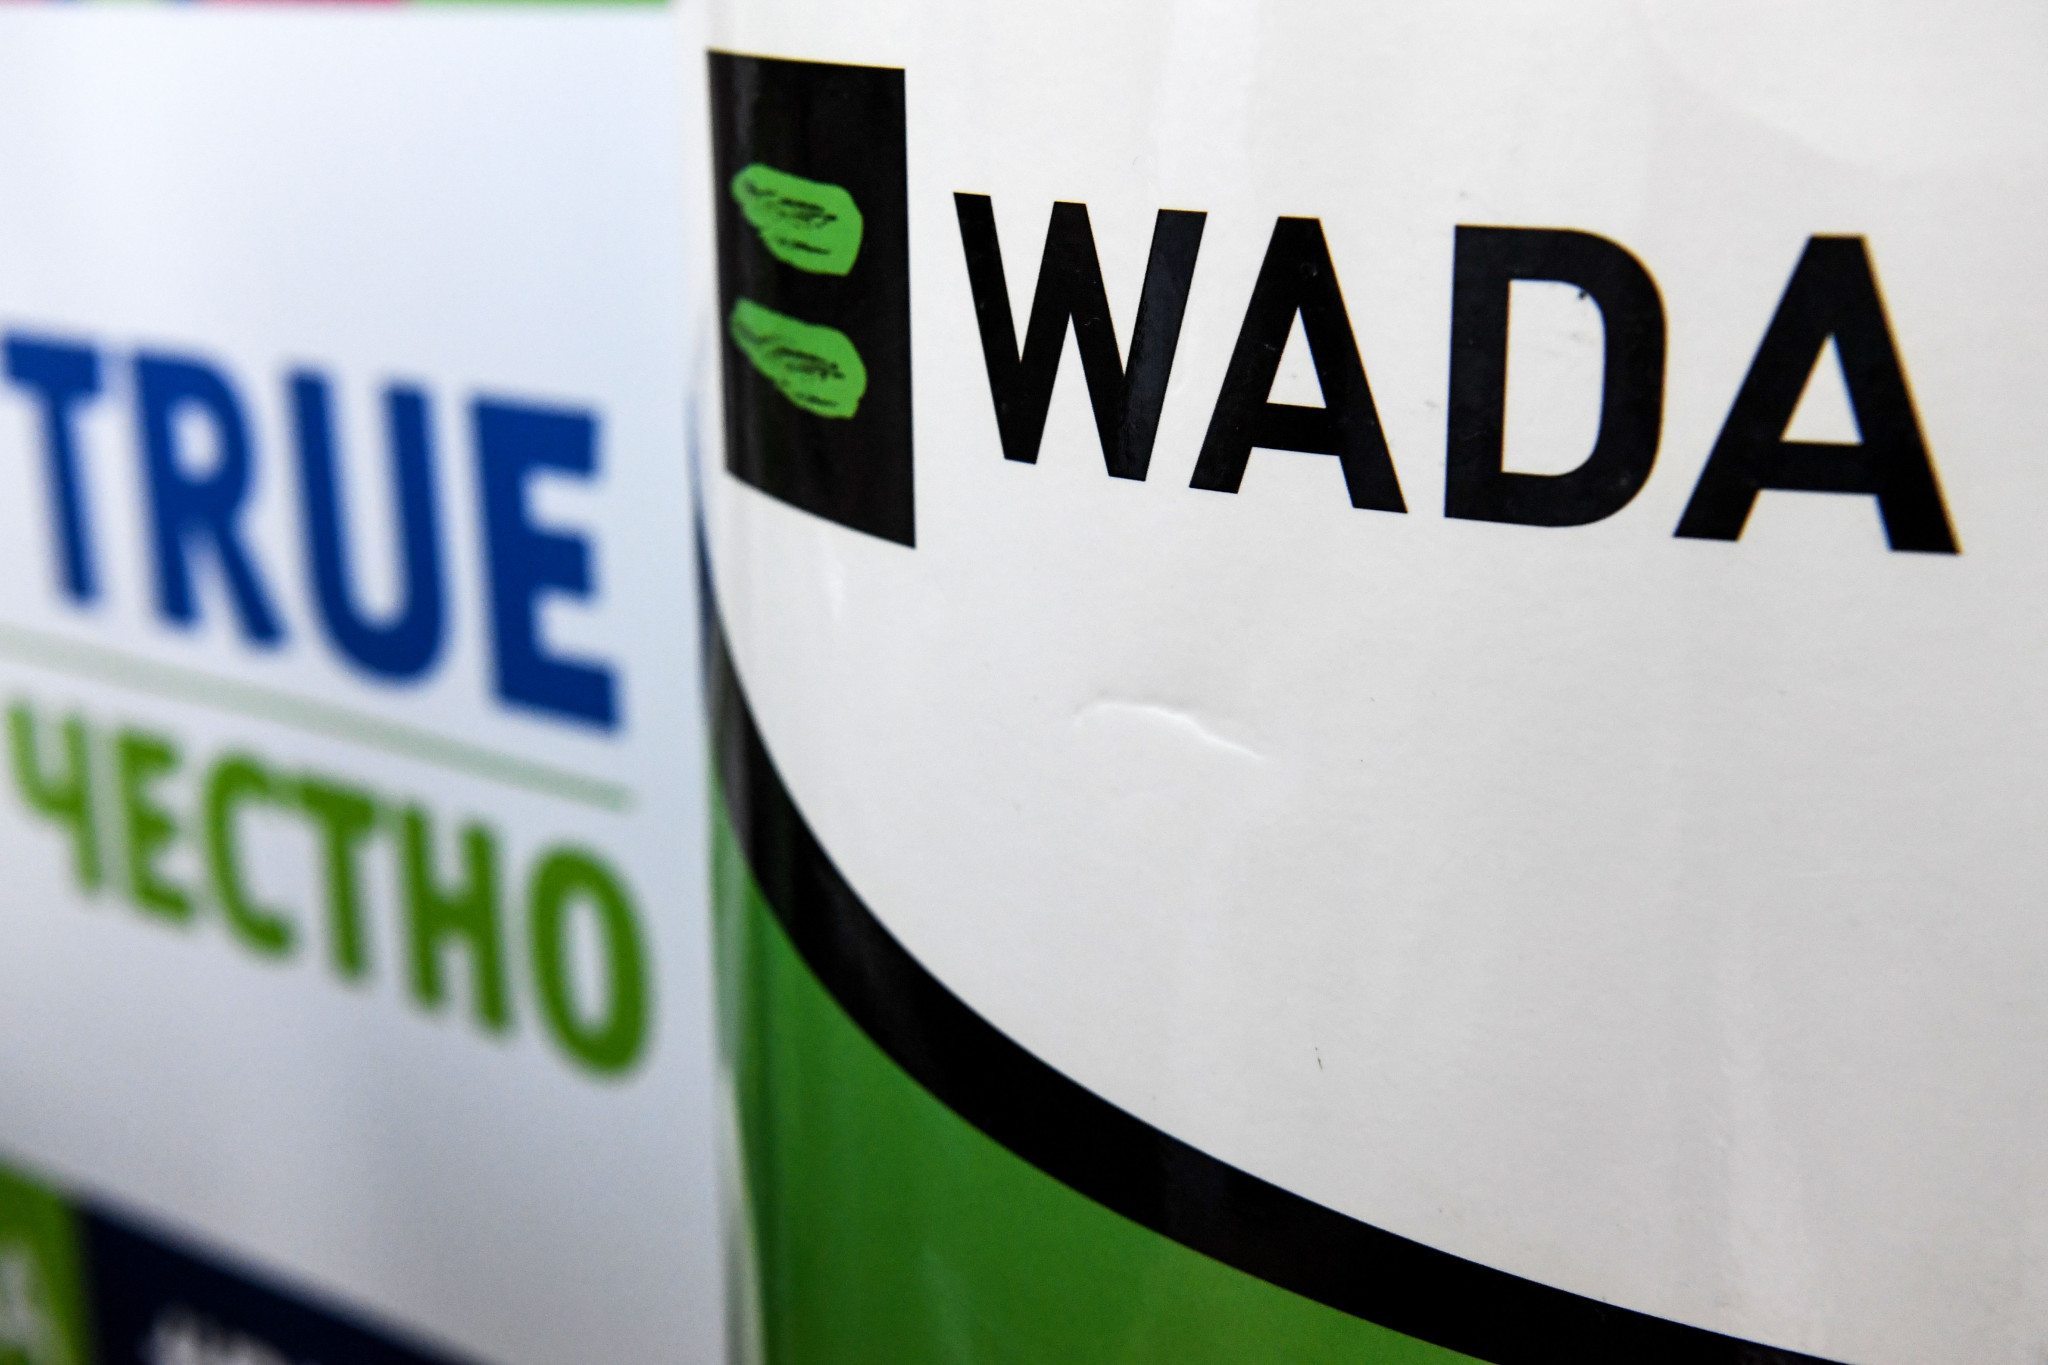 WADA insists it will review RUSADA's decision regardless of whether it is made public or not and will appeal to the Court of Arbitration for Sport if it deems that necessary ©Getty Images